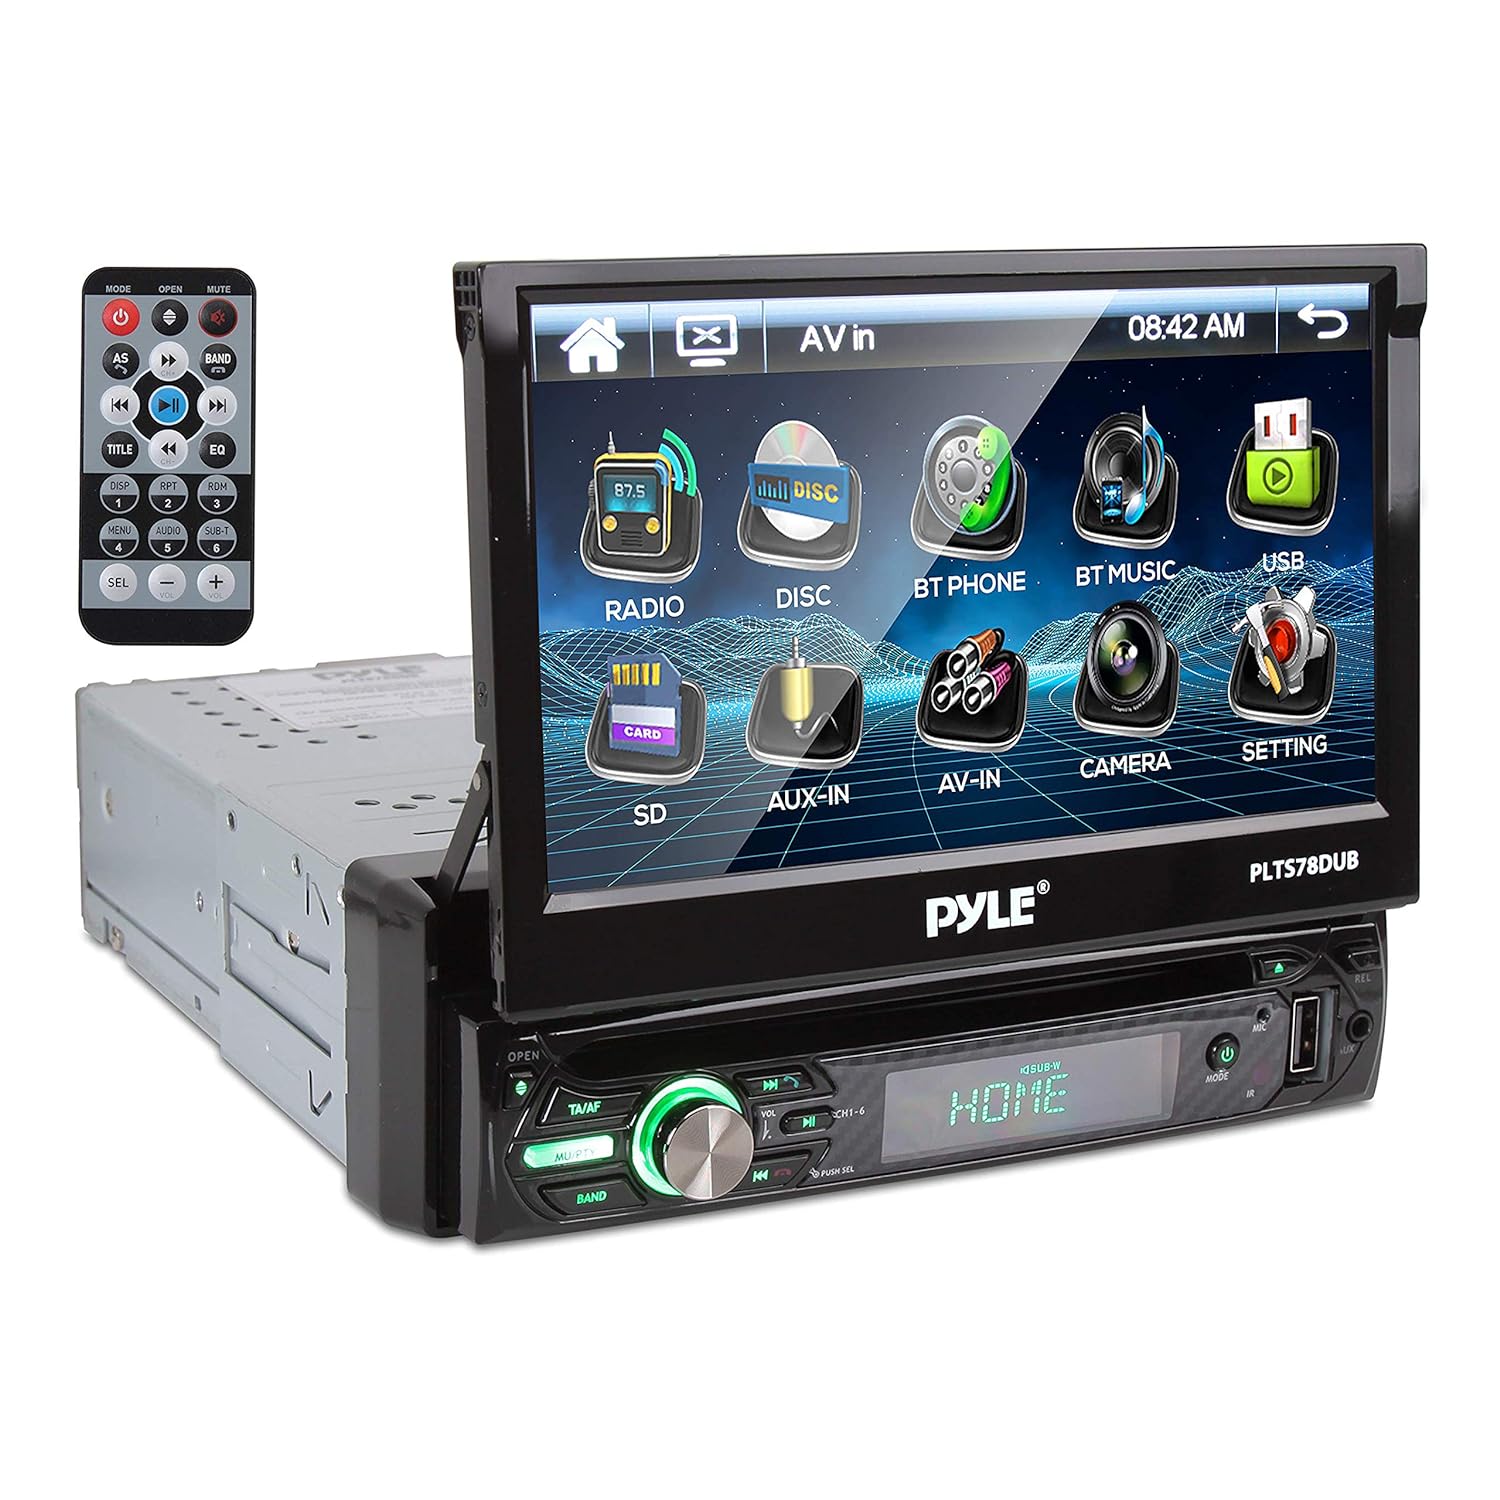 Pyle Single DIN Head Unit Receiver - In-Dash Car Stereo with 7” Multi-Color Touchscreen Display - Audio Video System wit…